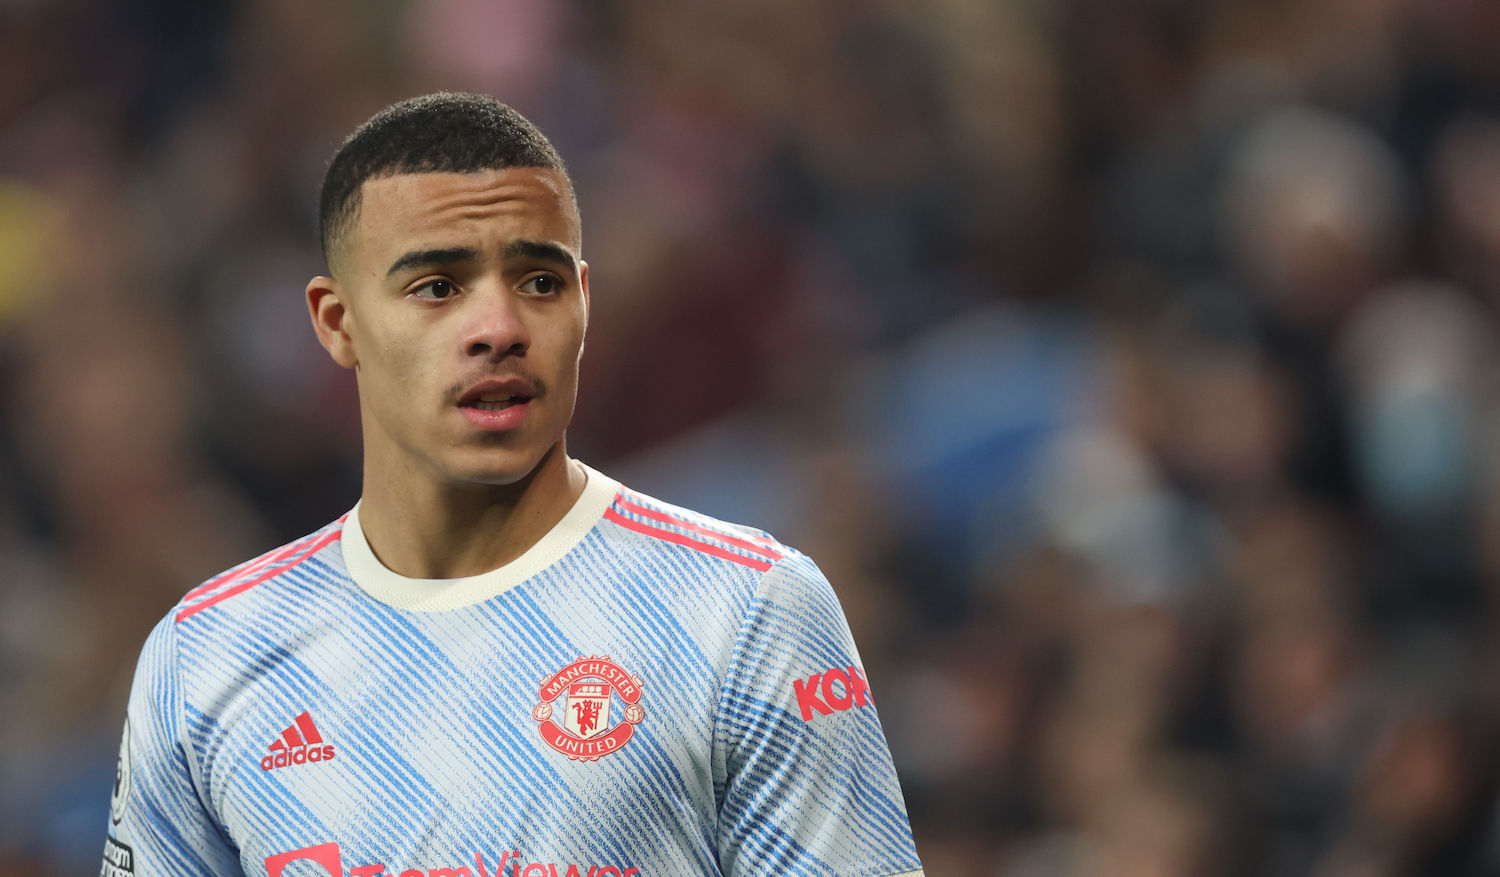 BIRMINGHAM, ENGLAND - JANUARY 15: Mason Greenwood of Manchester United during the Premier League match between Aston Villa and Manchester United at Villa Park on January 15, 2022 in Birmingham, United Kingdom. (Photo by Matthew Ashton - AMA/Getty Images)